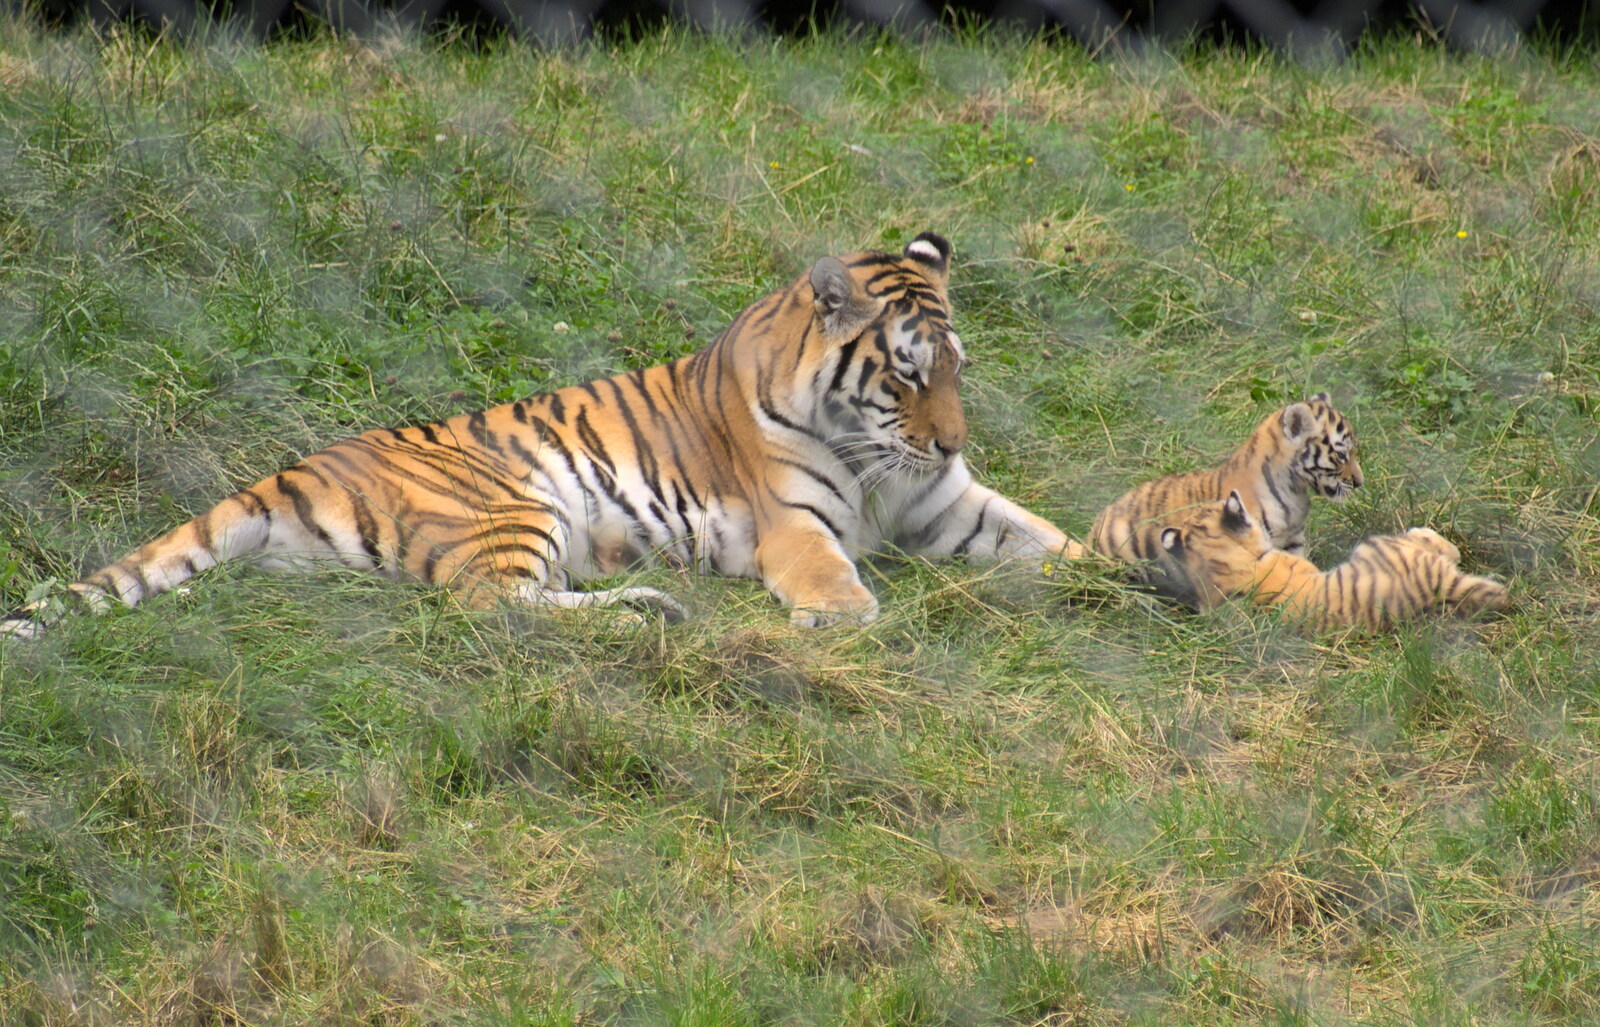 A tiger and a pair of cubs from Tiger Cubs at Banham Zoo, Banham, Norfolk - 6th August 2013